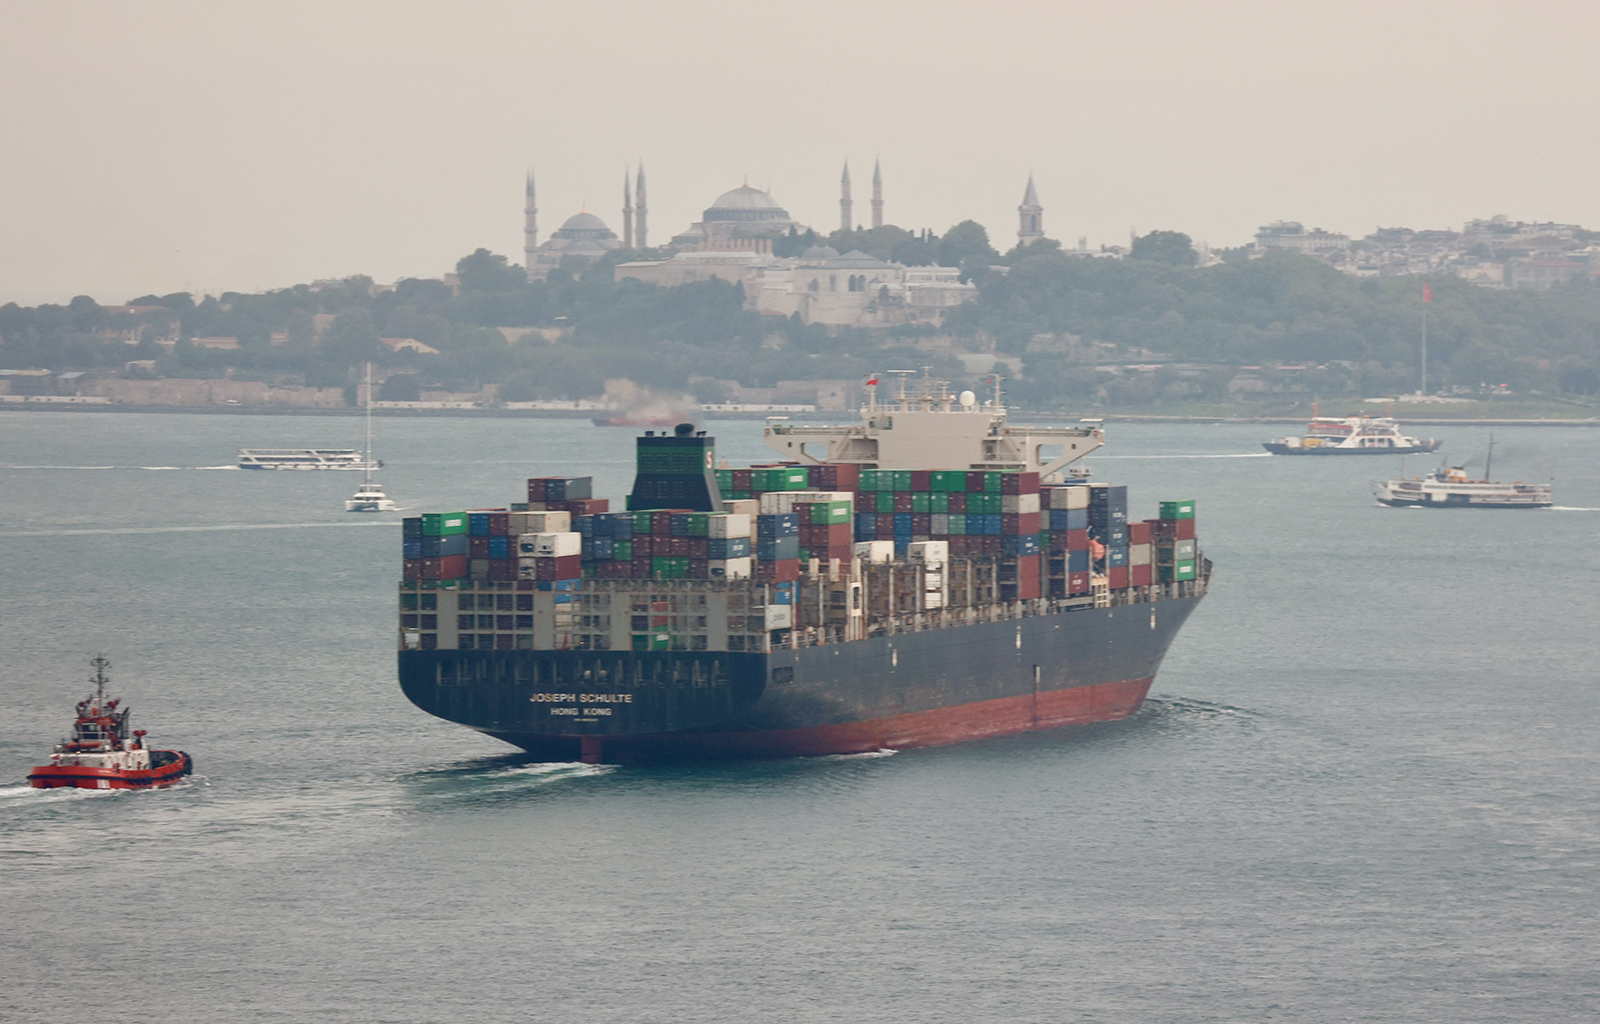 Hong-Kong-flagged container ship Joseph Schulte transits the Bosporus in Istanbul, Turkey on August 18.